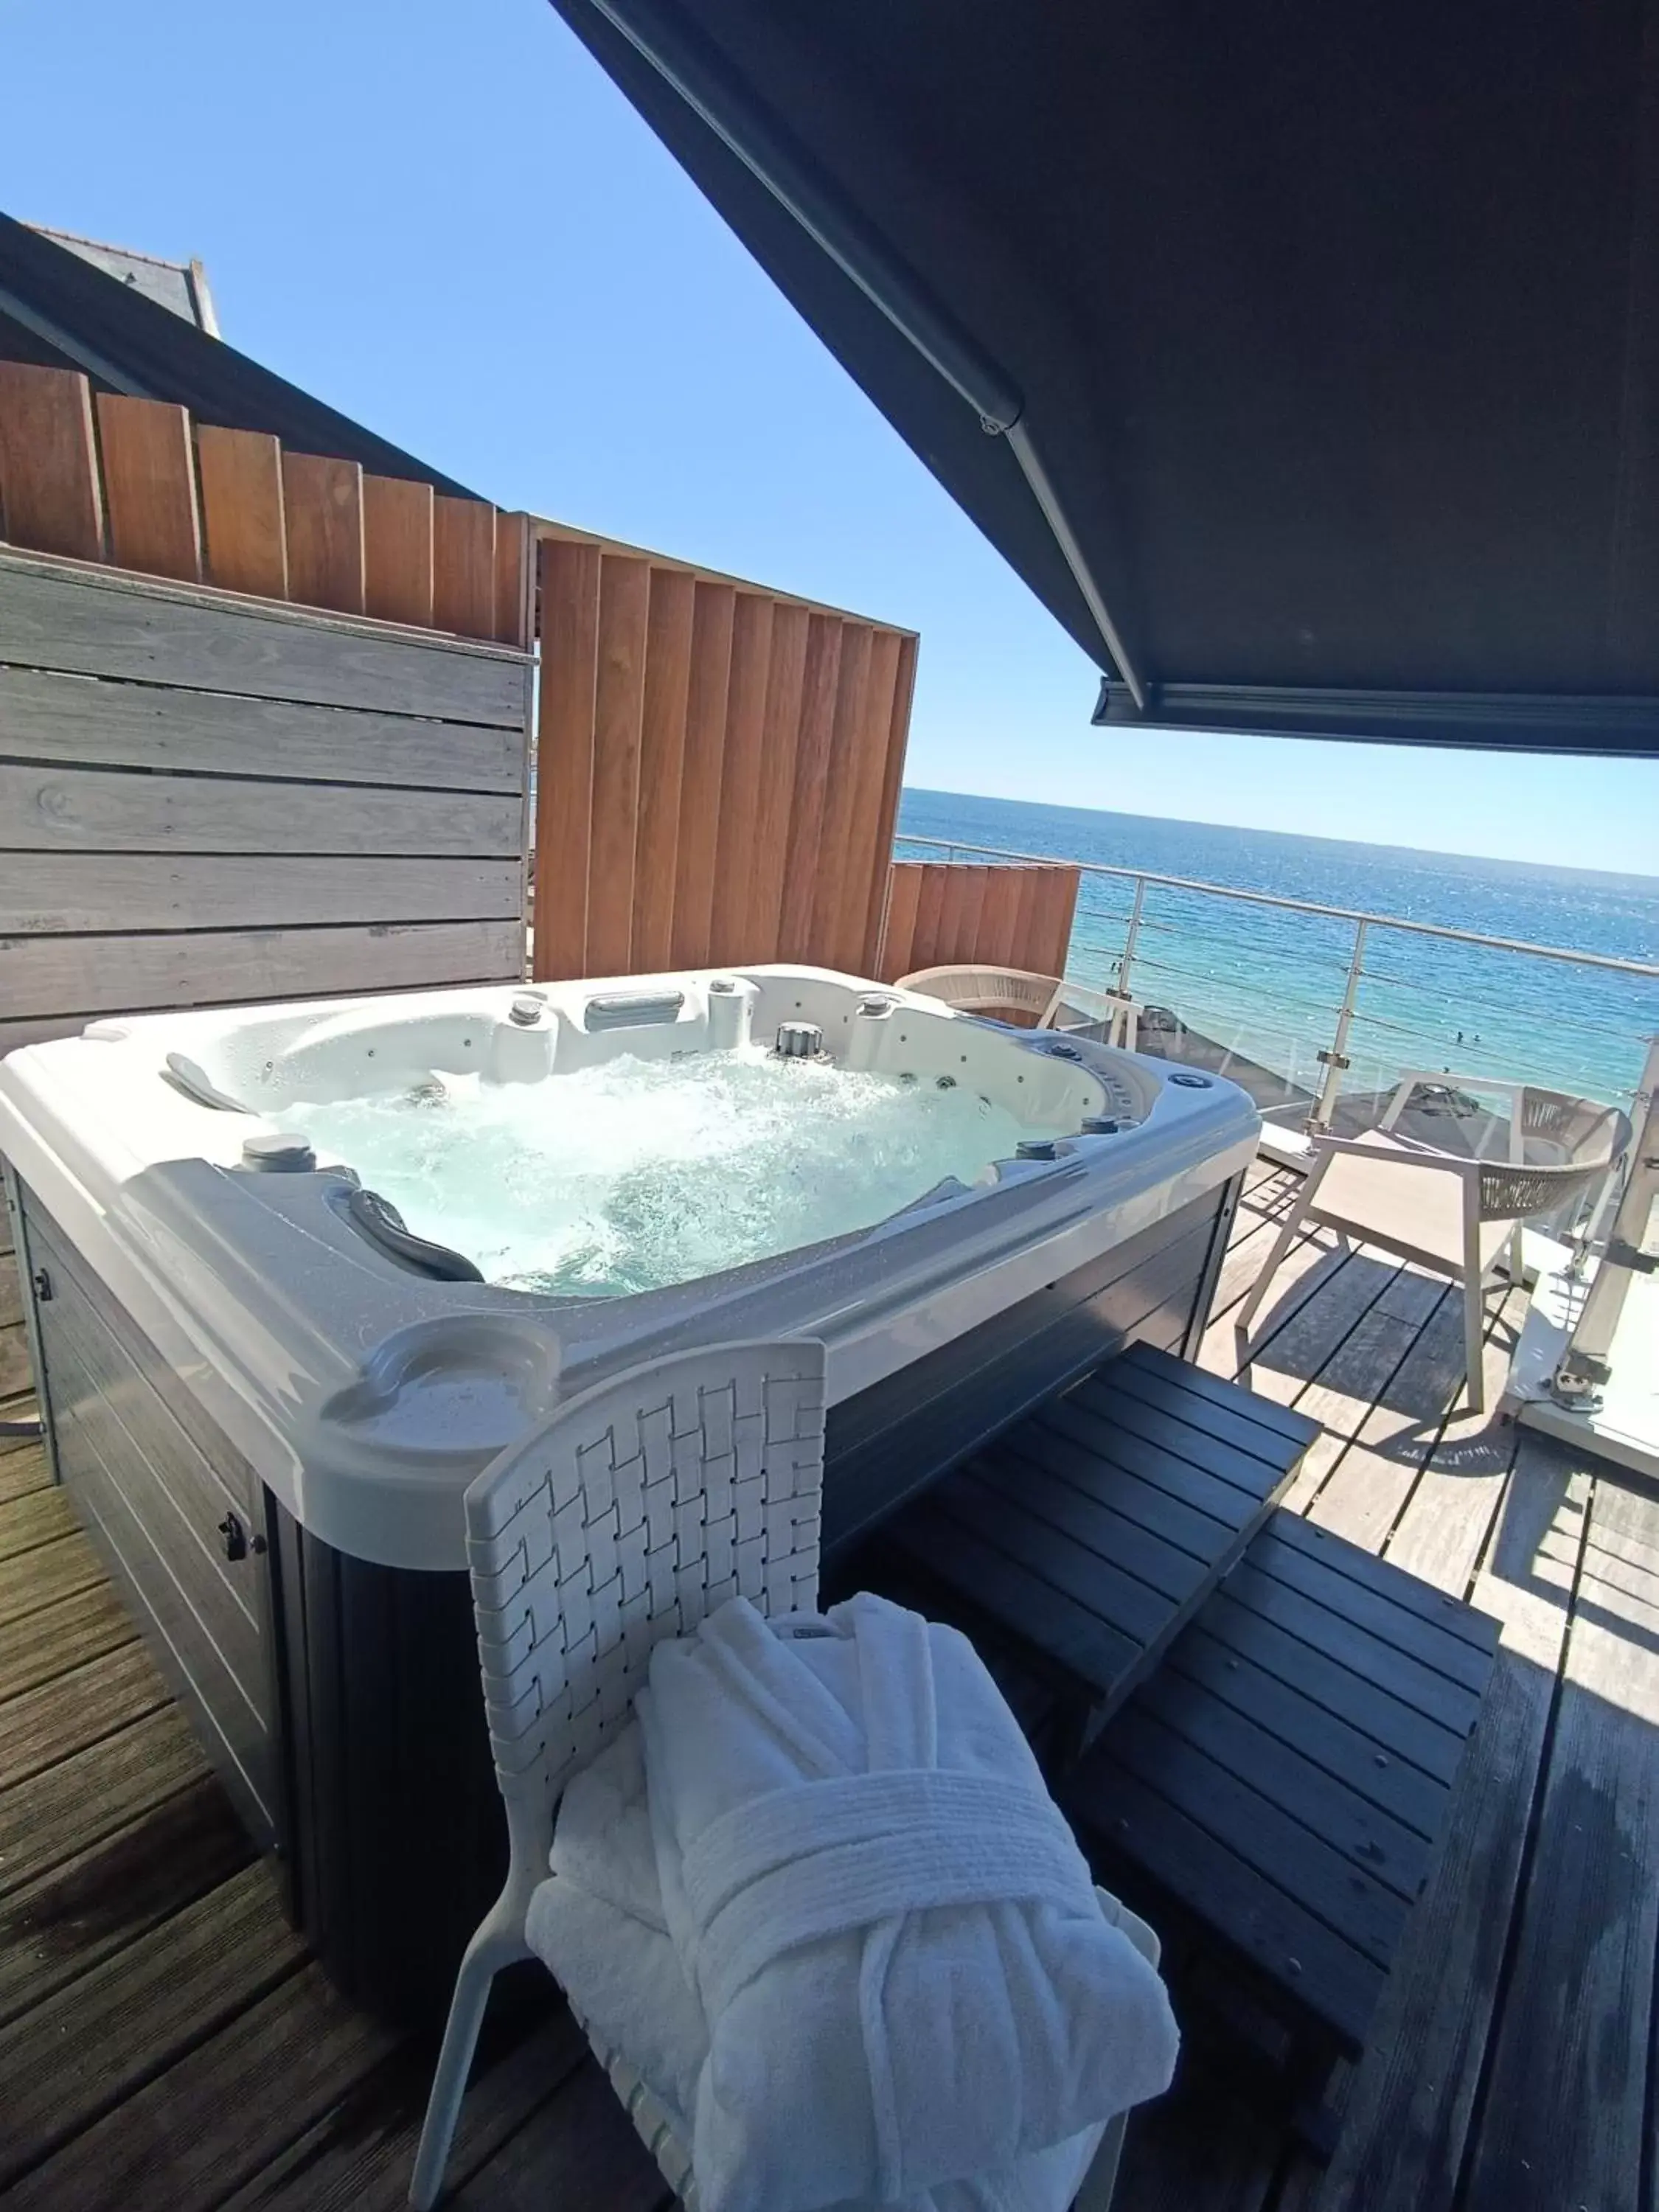 Hot Tub in Les Sables Blancs